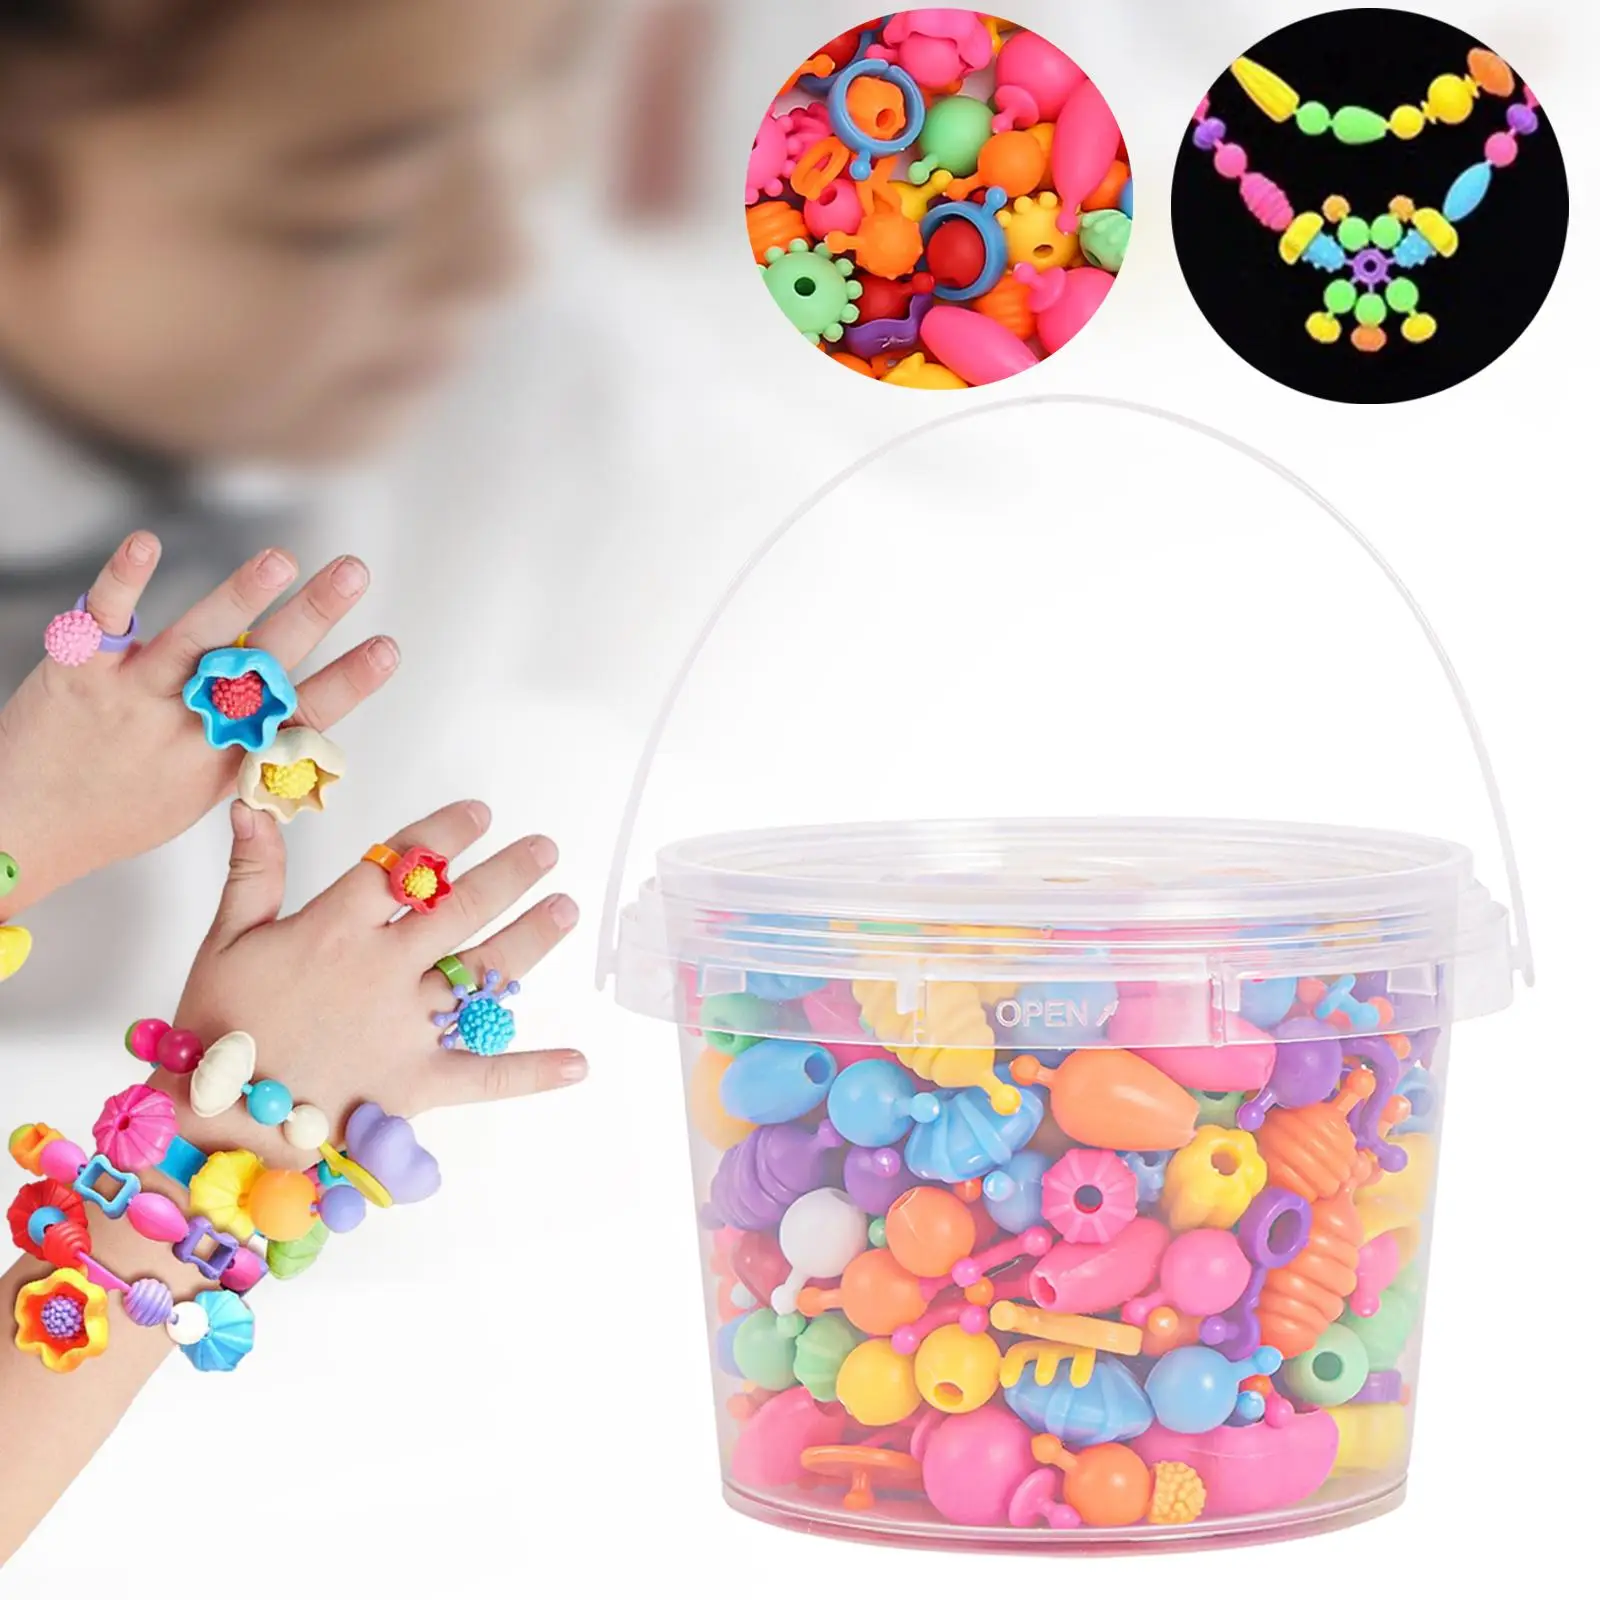 Beads for Kids Jewelry Making DIY Arts Snap Together Beads Crafts Supplies Toys for Hairband Necklace Bracelet Gift Girls